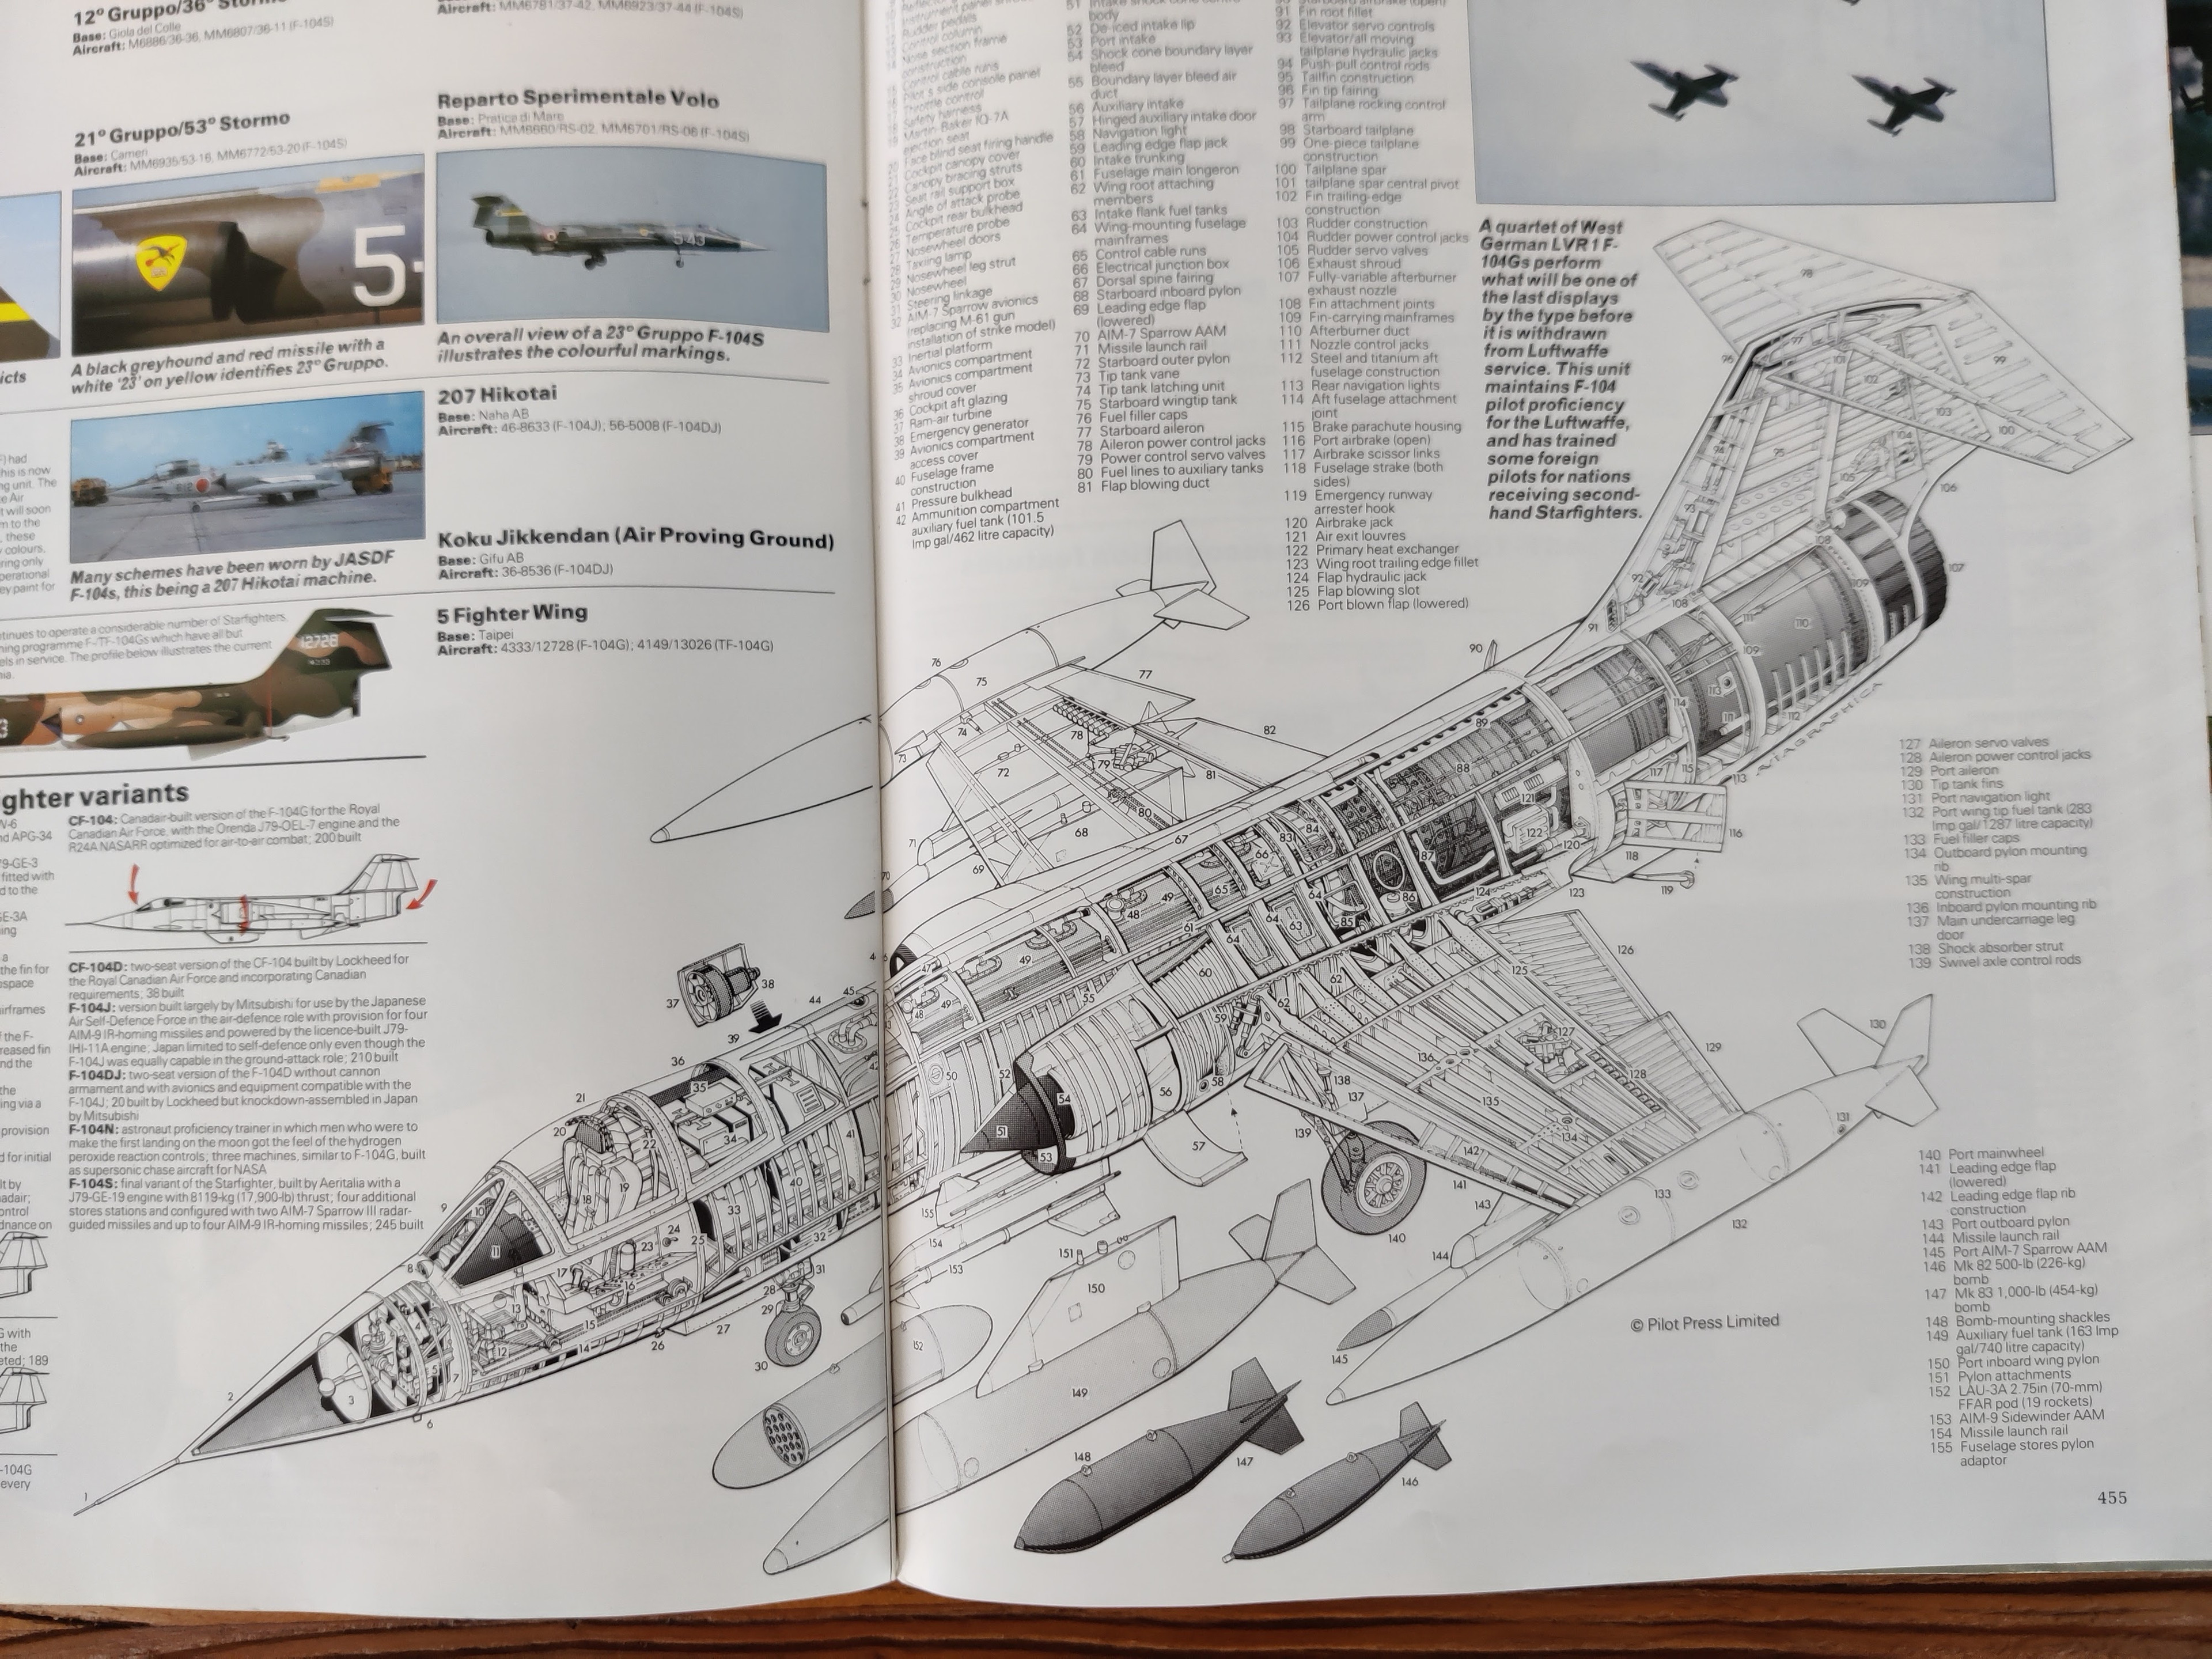 And a lot of design nods to the famous Lockheed F-104, here in another of my illustration books.